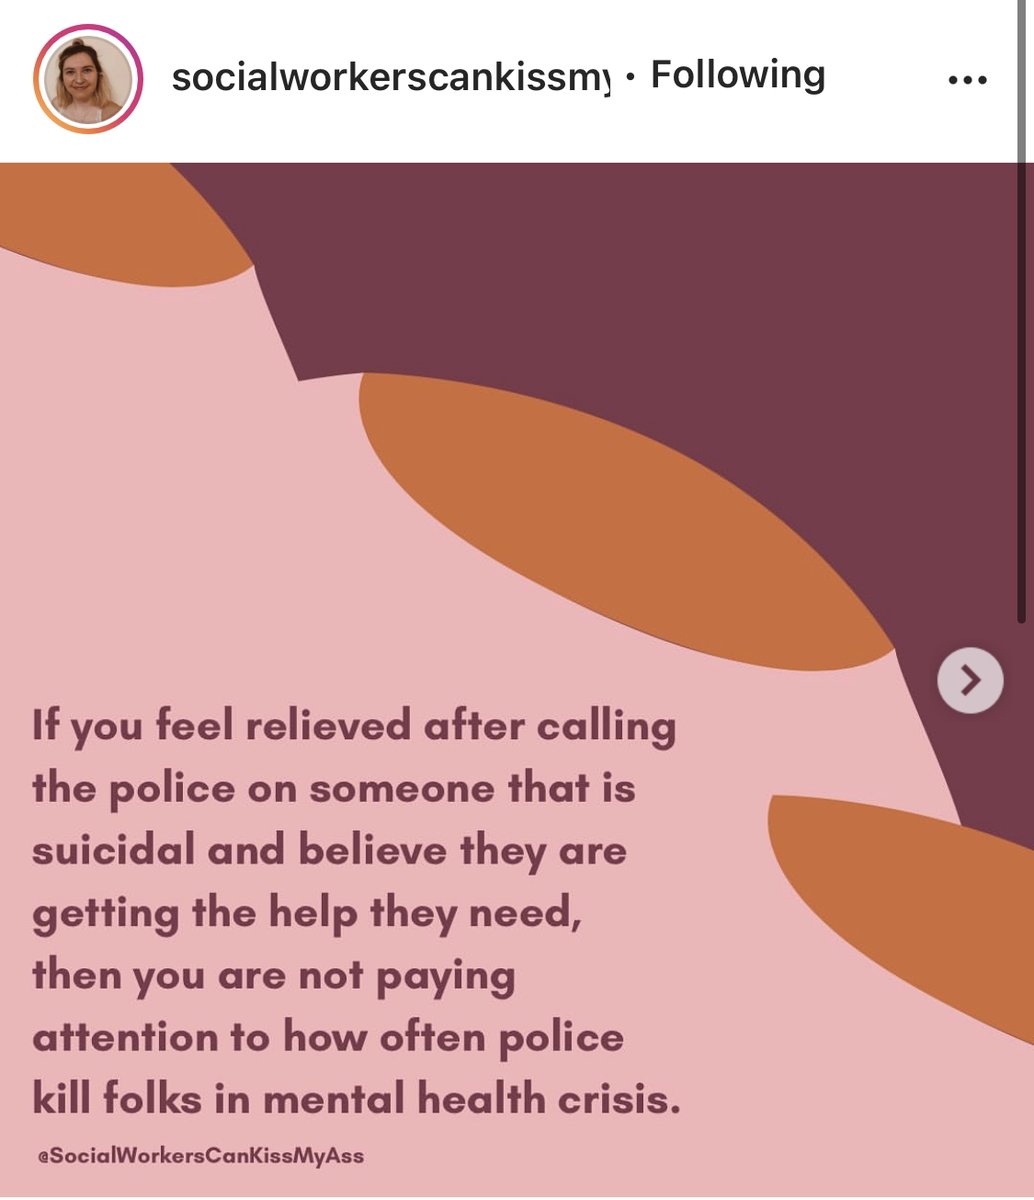 SLIDE 1: If you feel relieved after calling the police on someone that is suicidal and believe they are getting the help they need, then you are not paying attention to how often police kill folks in mental health crisis. 13/